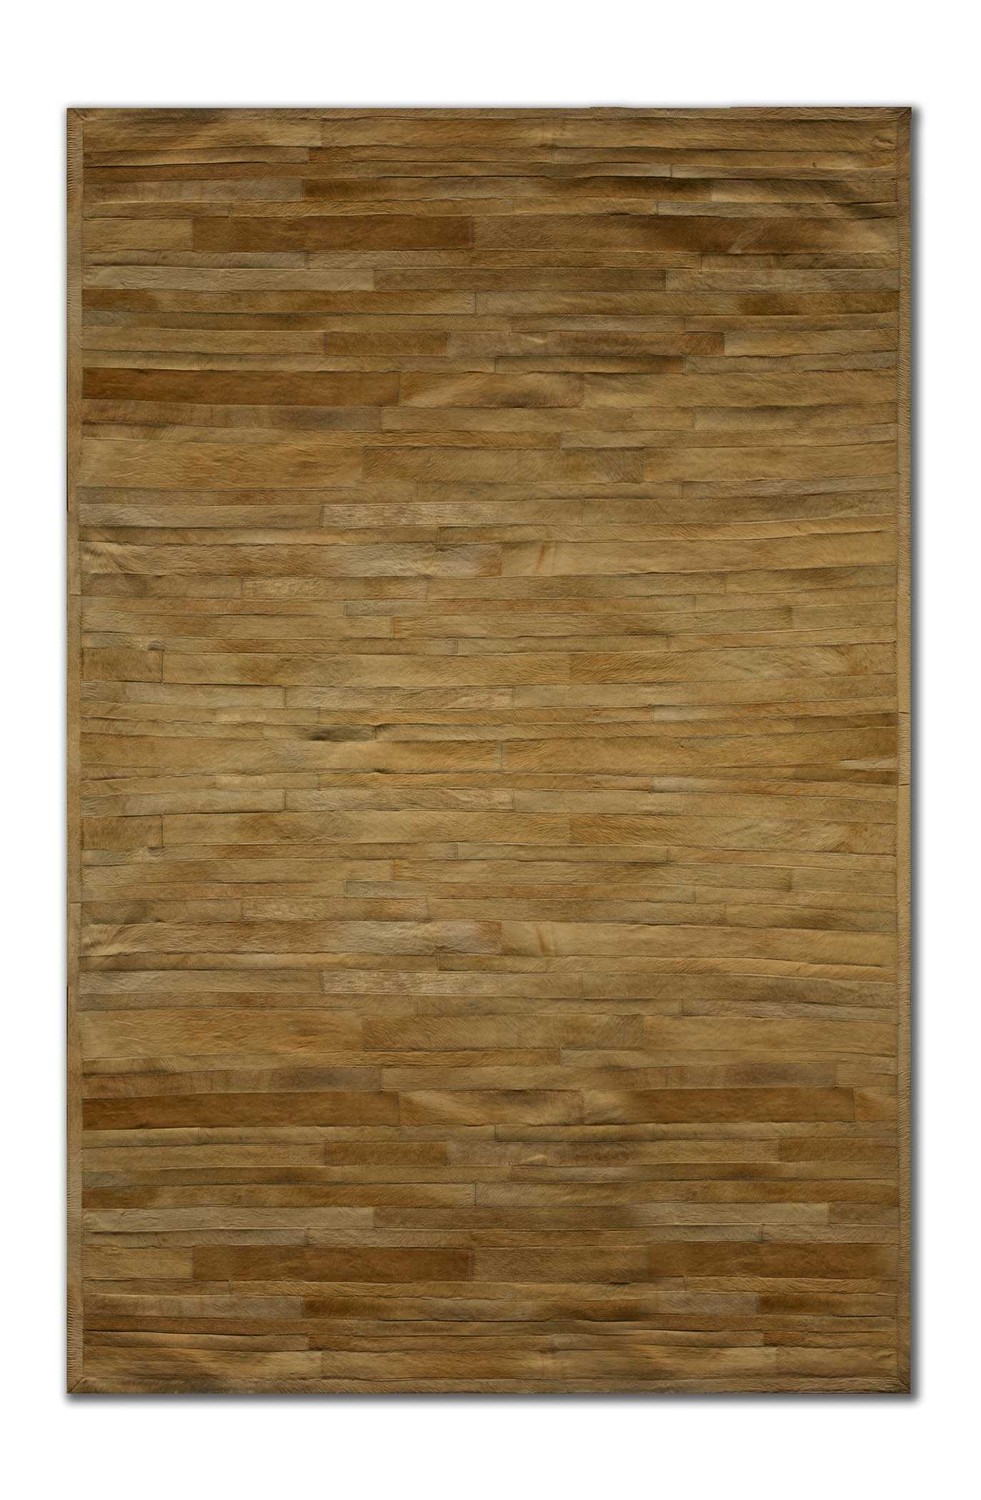 96" x 120" Tan Linear, Cowhide Stitched - Area Rug